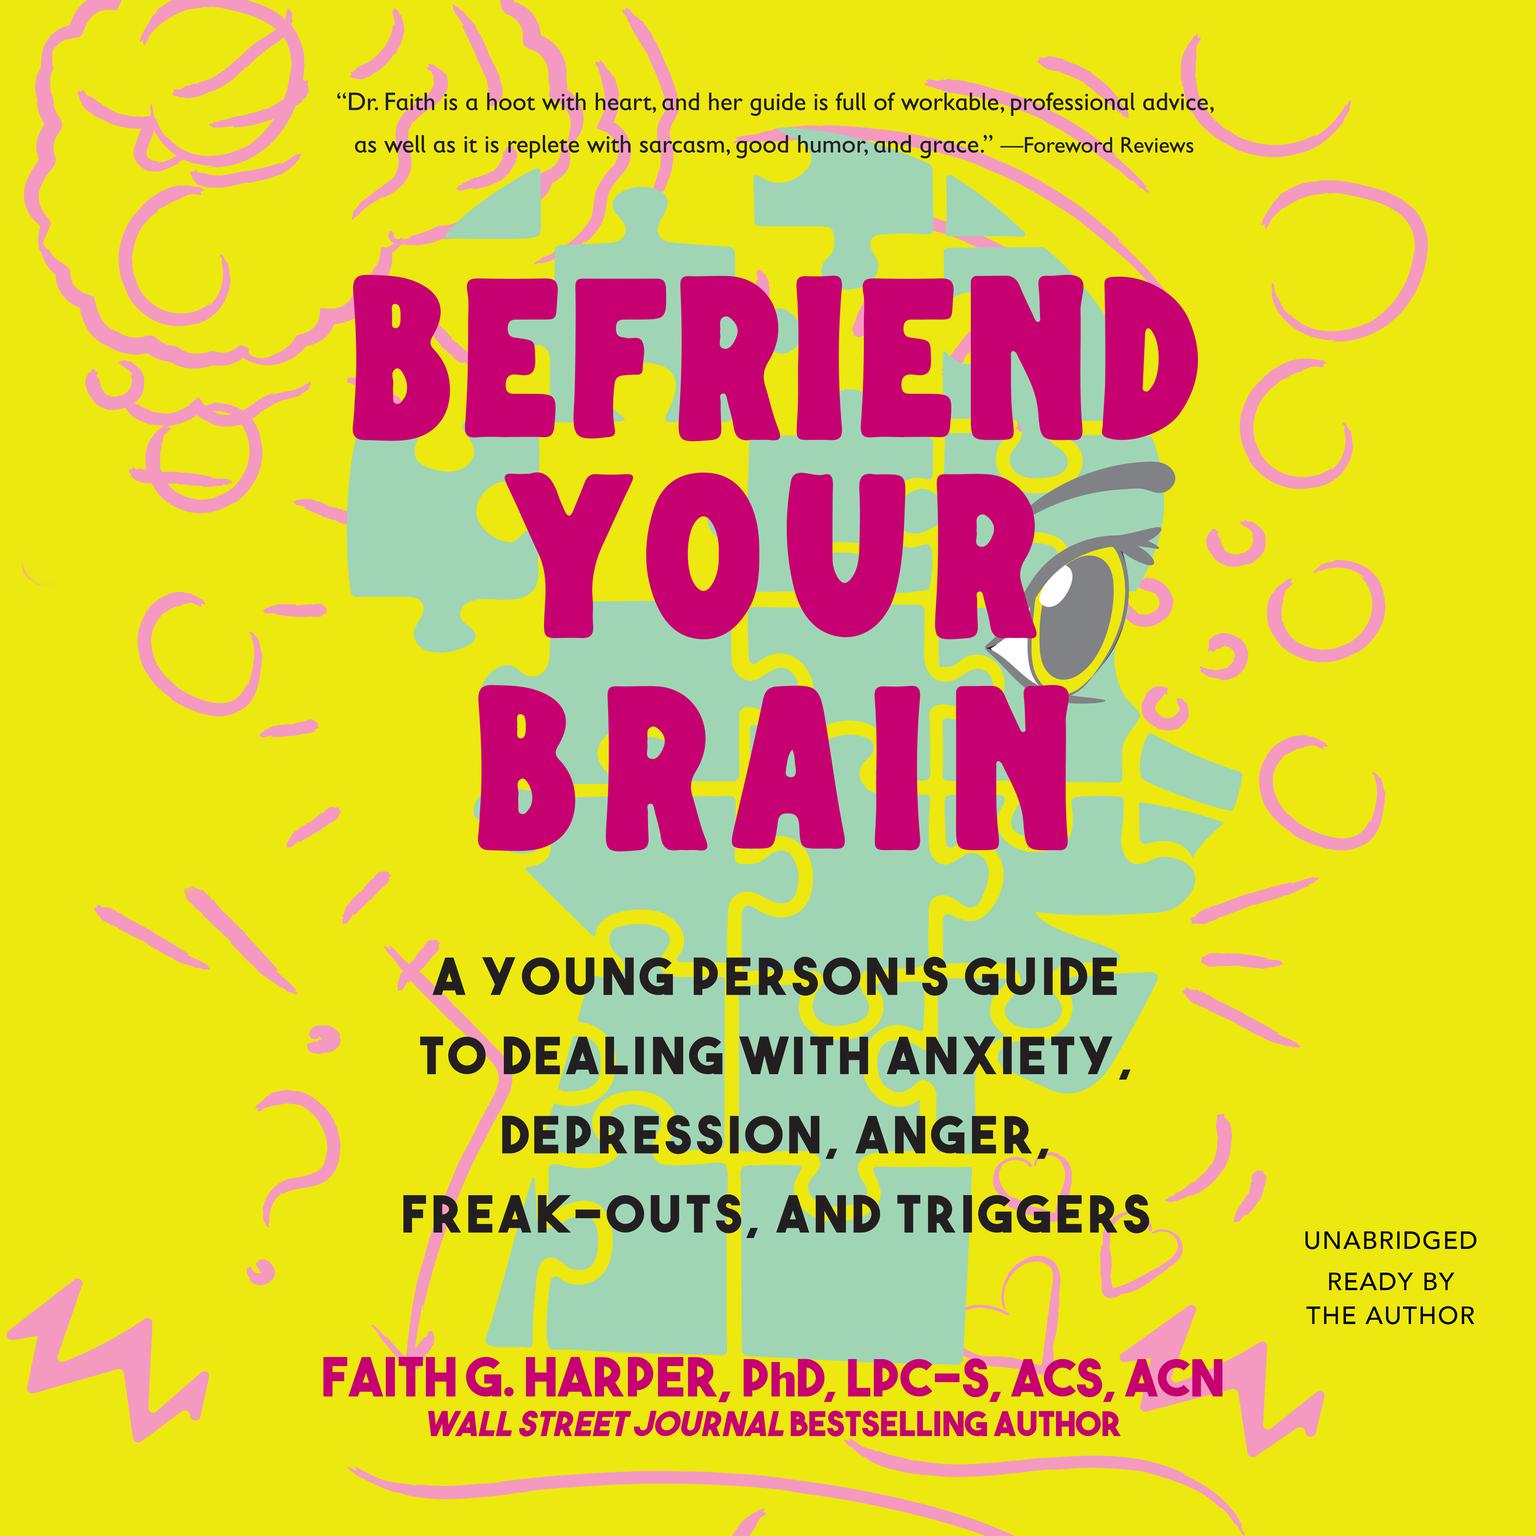 Befriend Your Brain: A Young Persons Guide to Dealing with Anxiety, Depression, Anger, Freak-Outs, and Triggers Audiobook, by Faith G. Harper